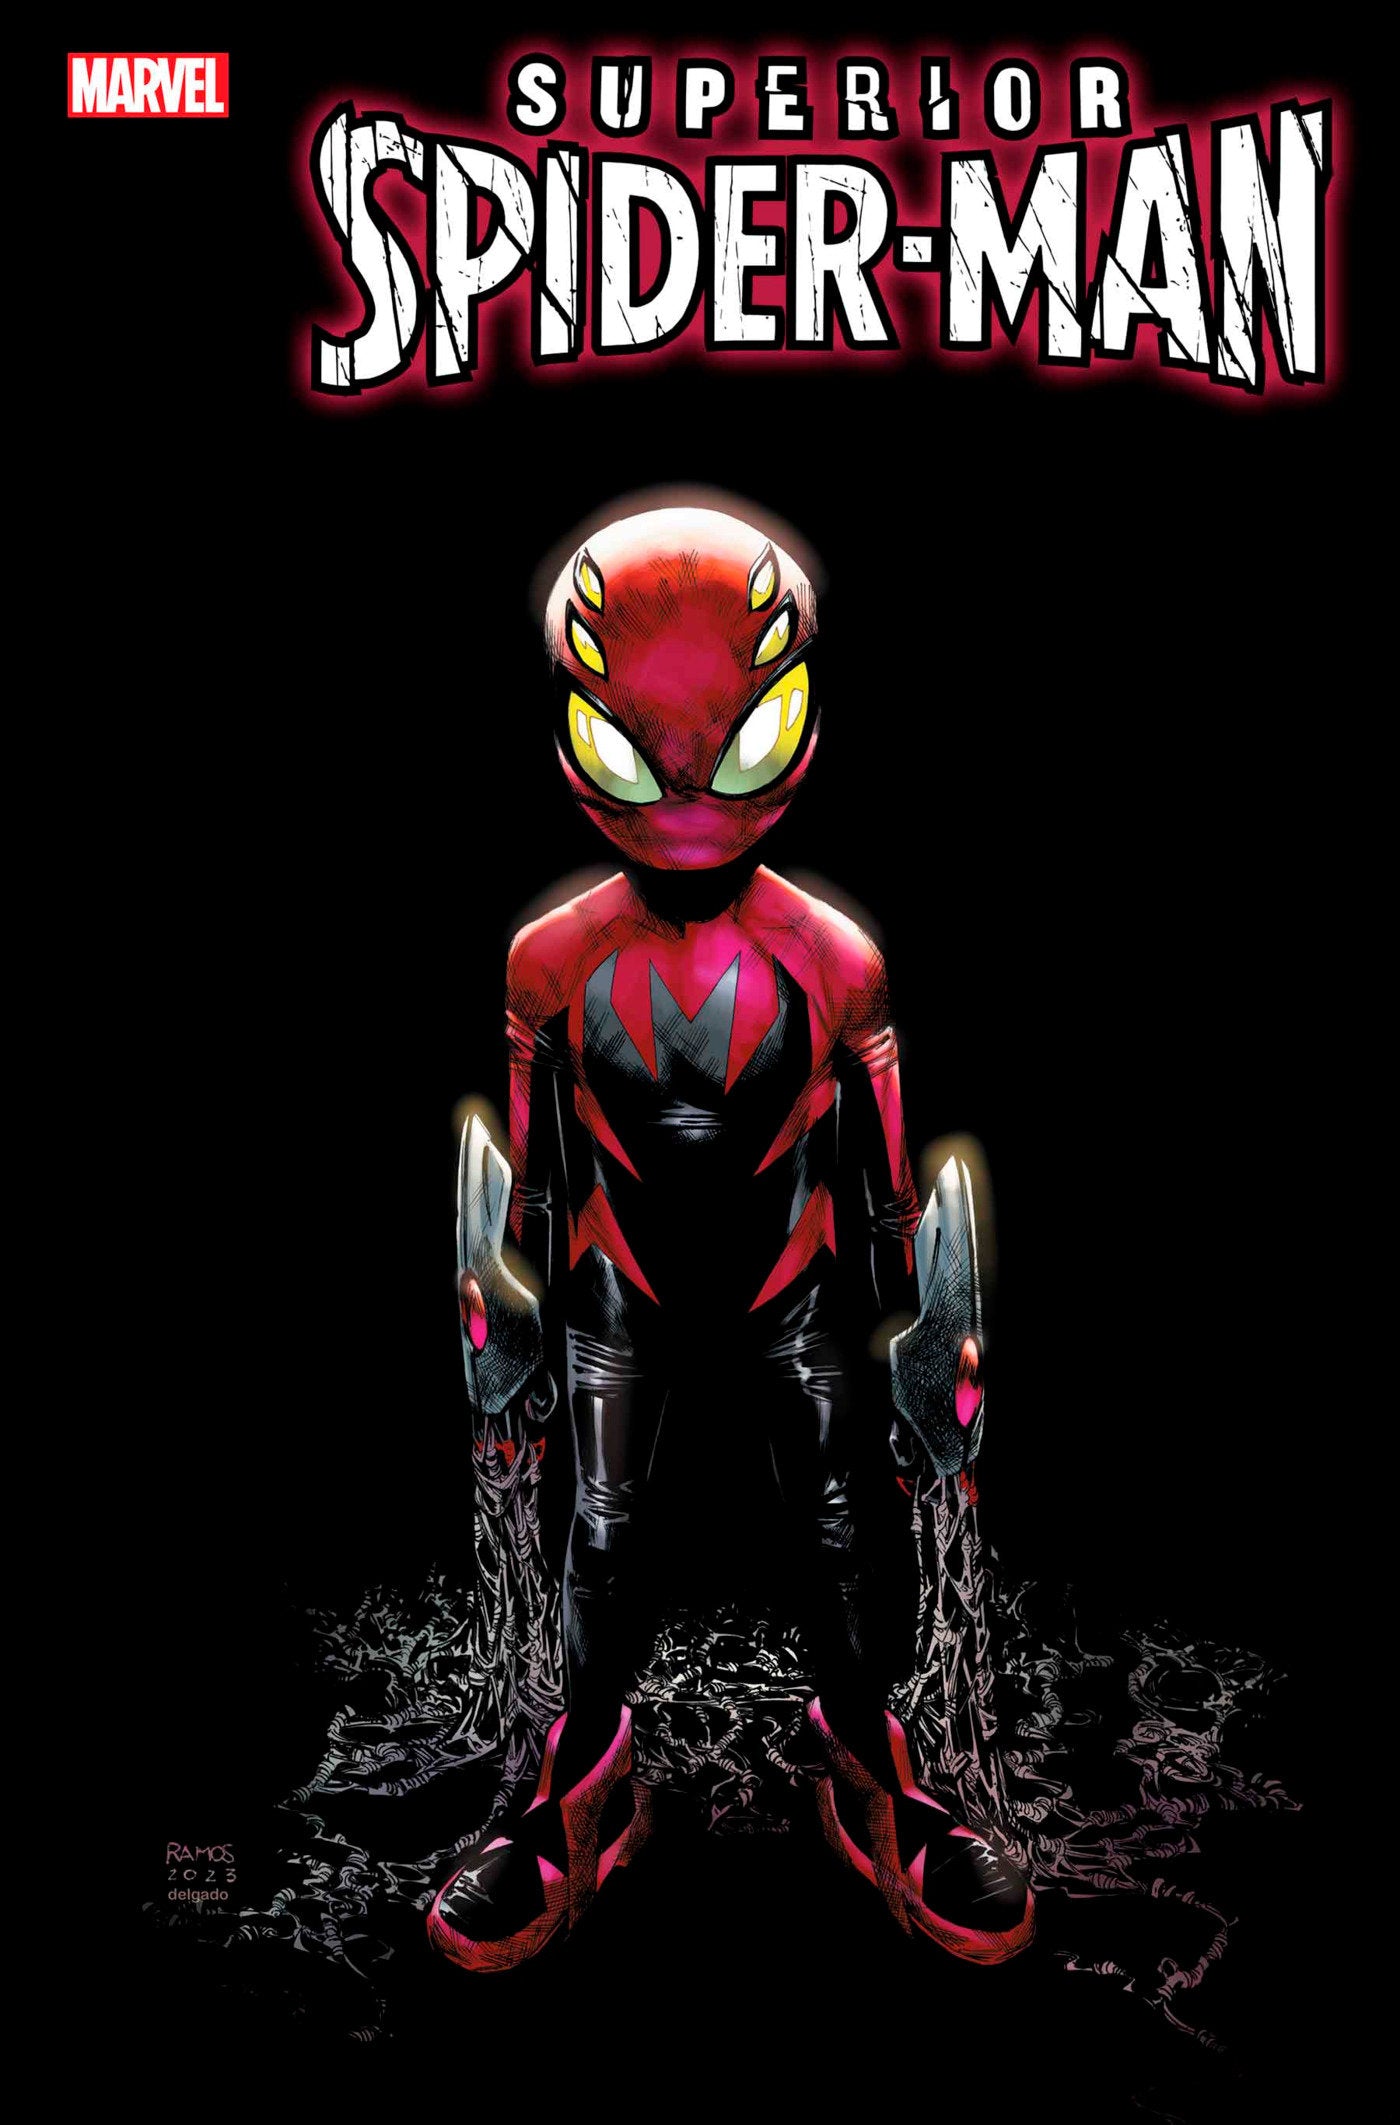 SUPERIOR SPIDER-MAN #7 HUMBERTO RAMOS VARIANT - Release Date:  5/22/24